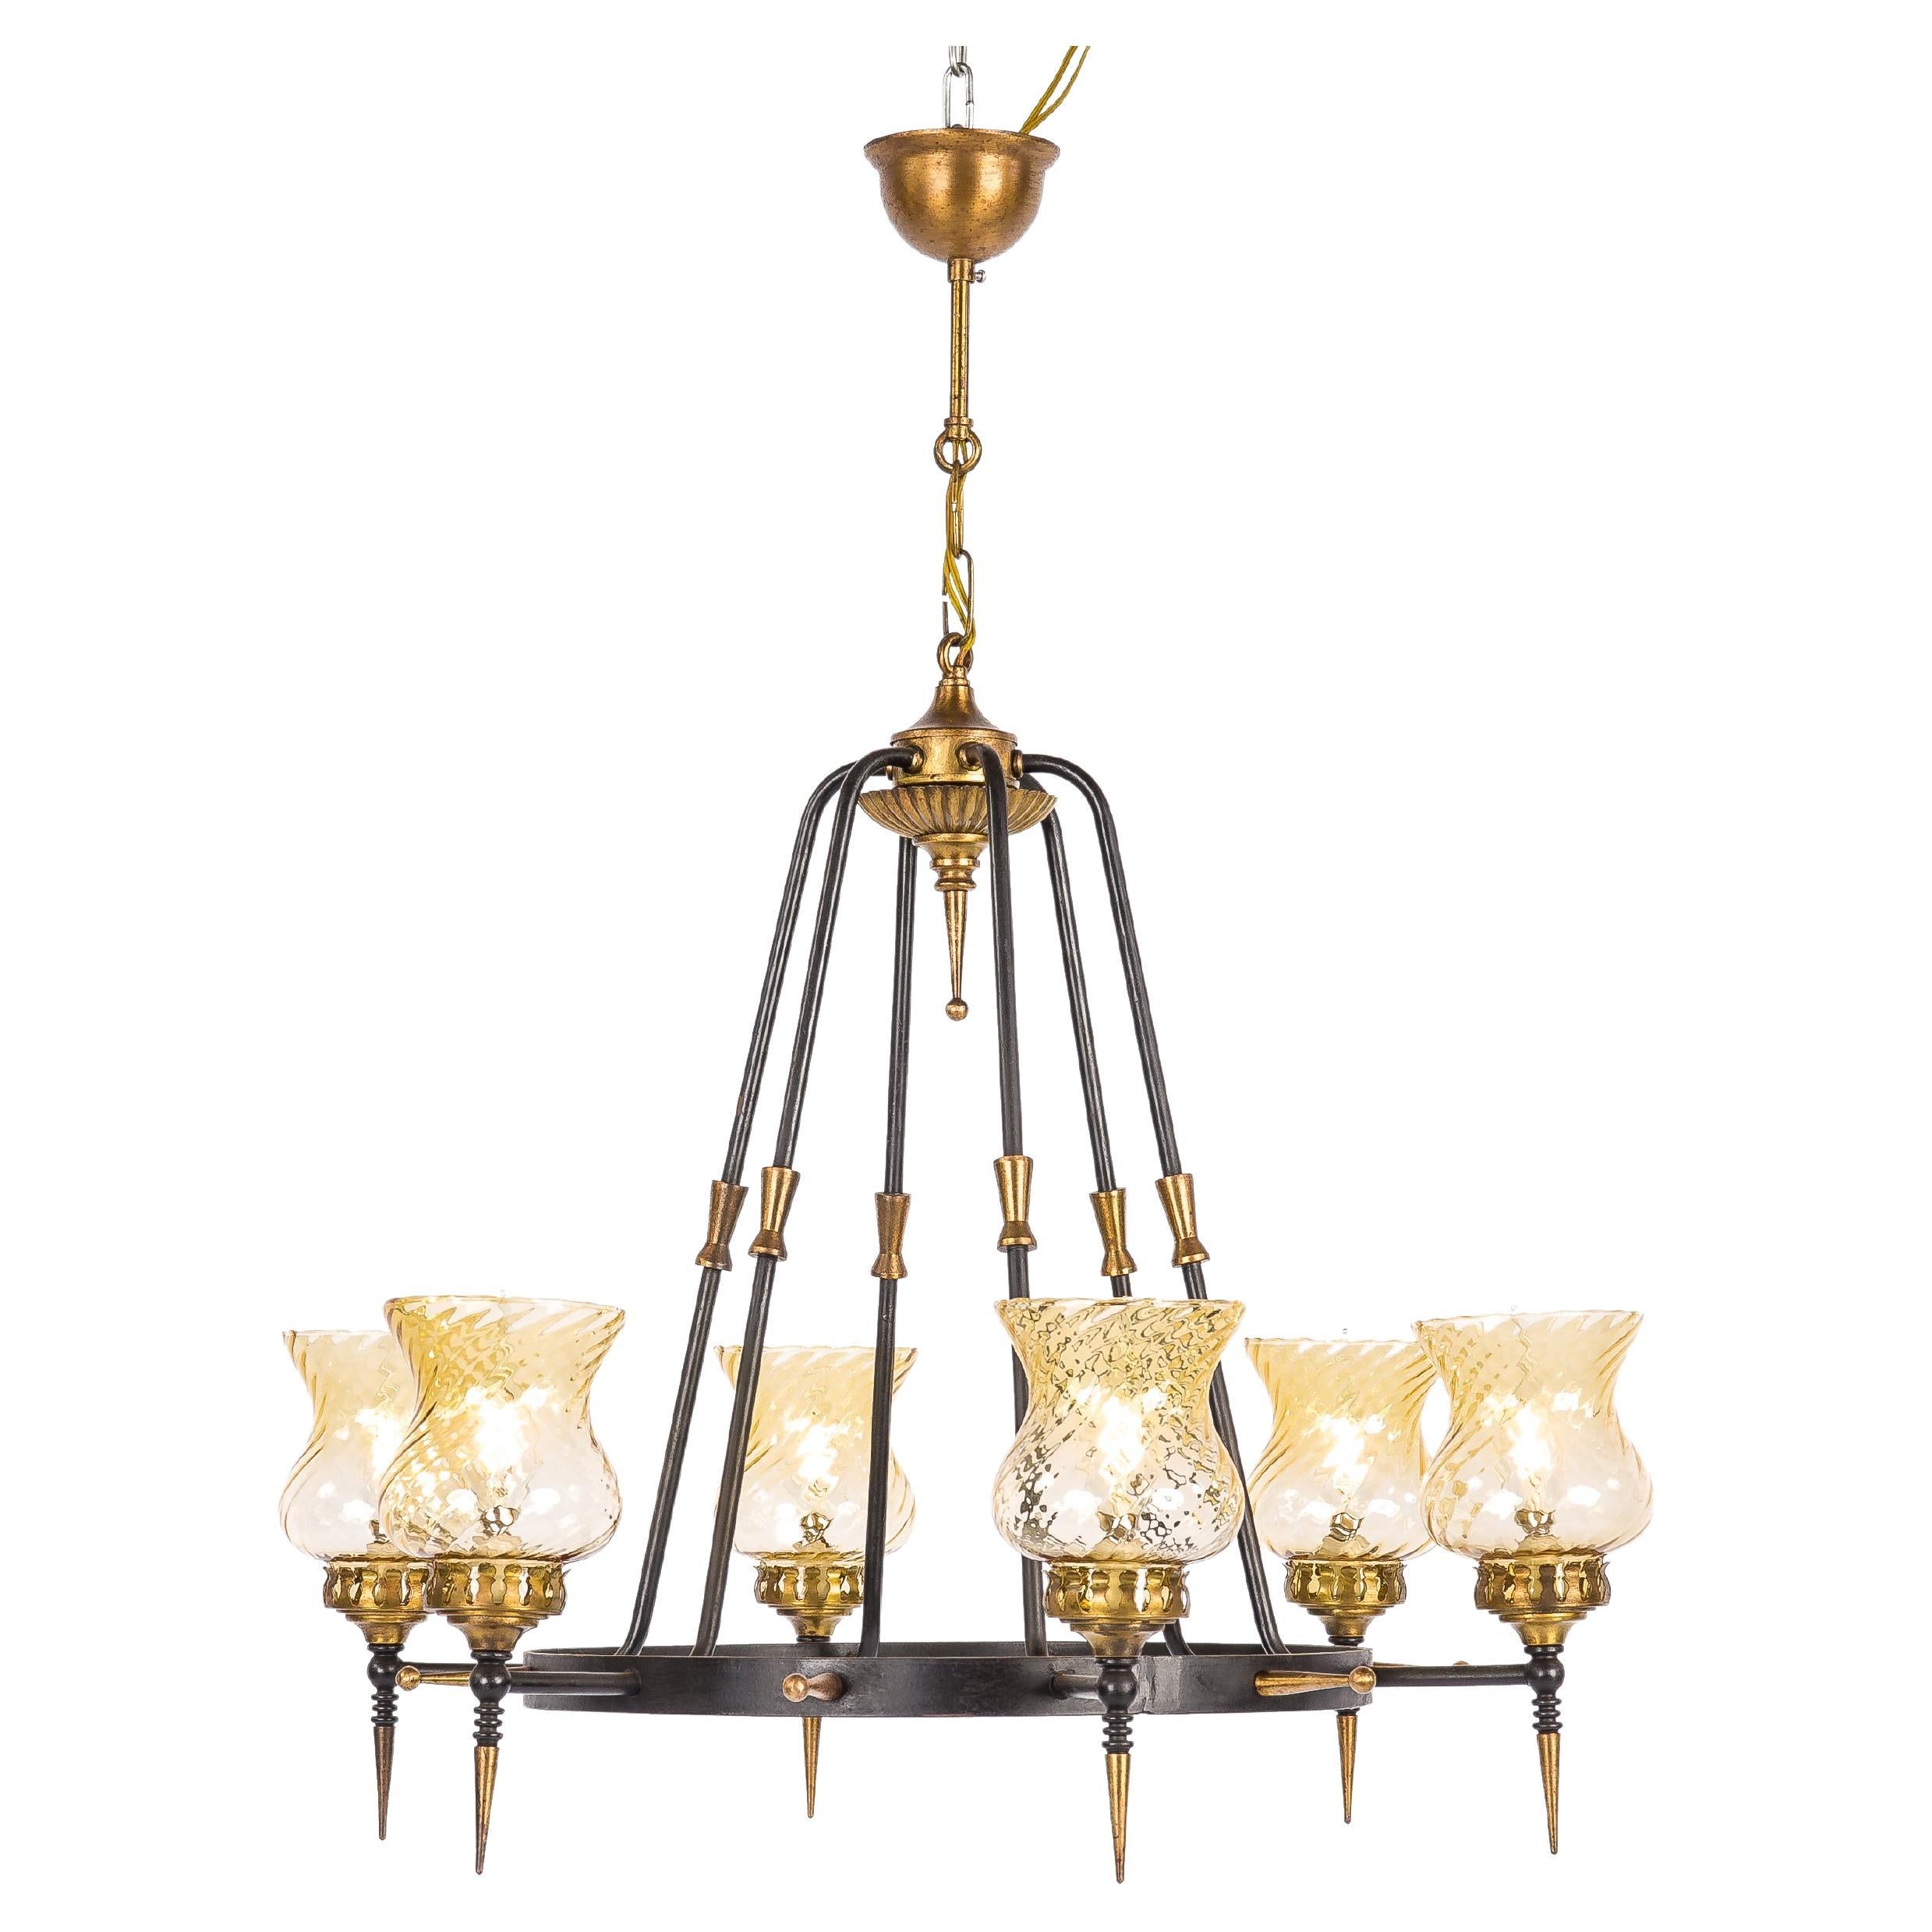 Vintage Mid-20th Century French Iron and Brass Ring Chandelier with 6 Torches For Sale